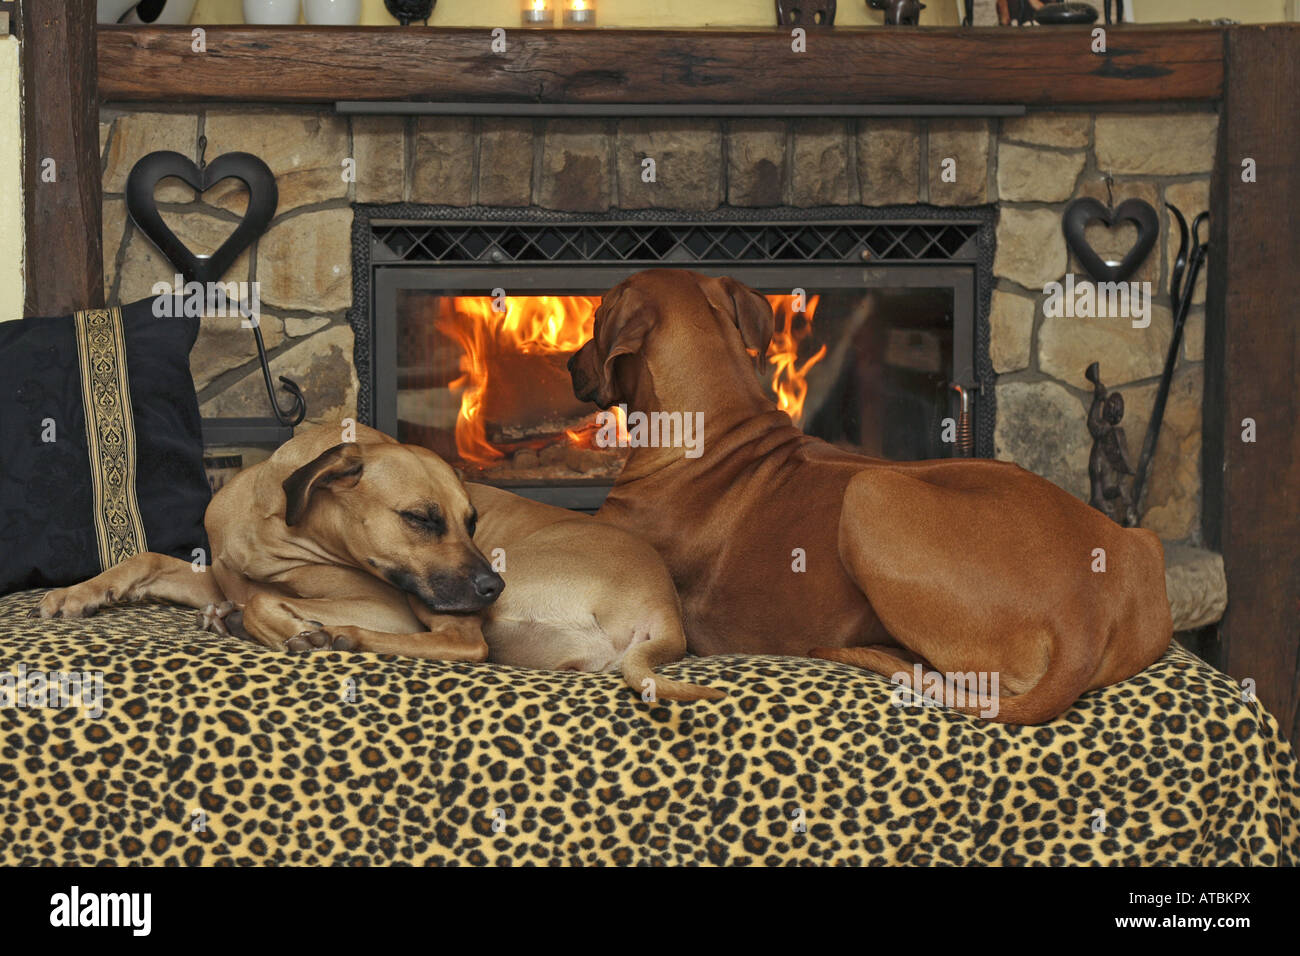 Rhodesian Ridgeback (Canis lupus f. familiaris), two dogs lying on sofa in front of a fireside Stock Photo